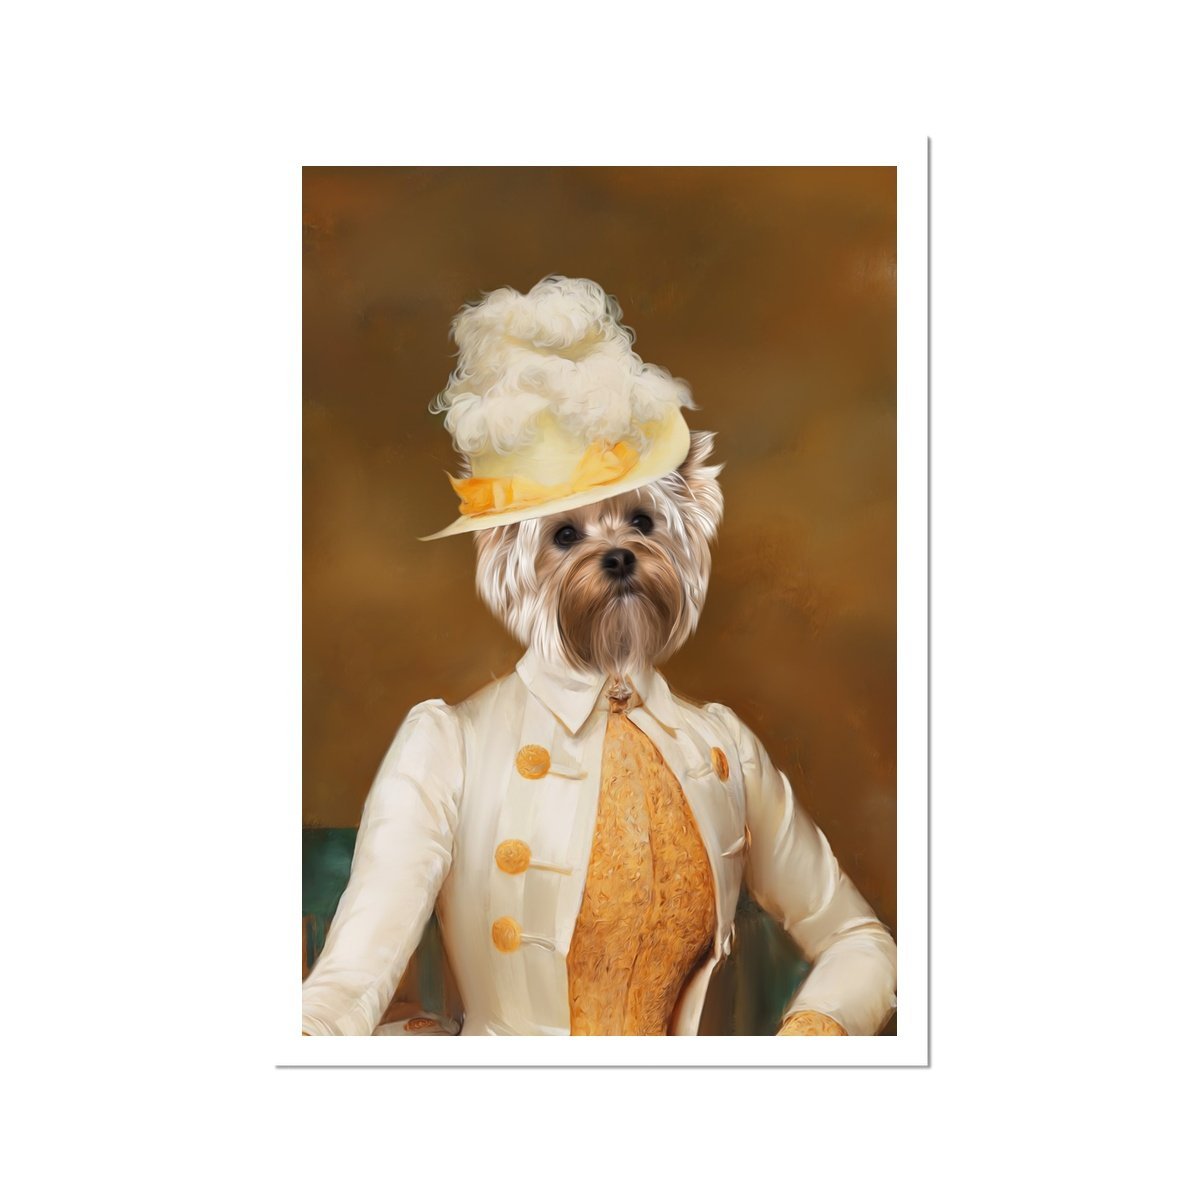 The Cherry Picker: Custom Pet Poster - Paw & Glory - #pet portraits# - #dog portraits# - #pet portraits uk#Paw & Glory, paw and glory, admiral painting dog general painting regal pet portraits, watercolour pet portraits, dog portrait oil painting crown and paw peaky blinders pet portraits